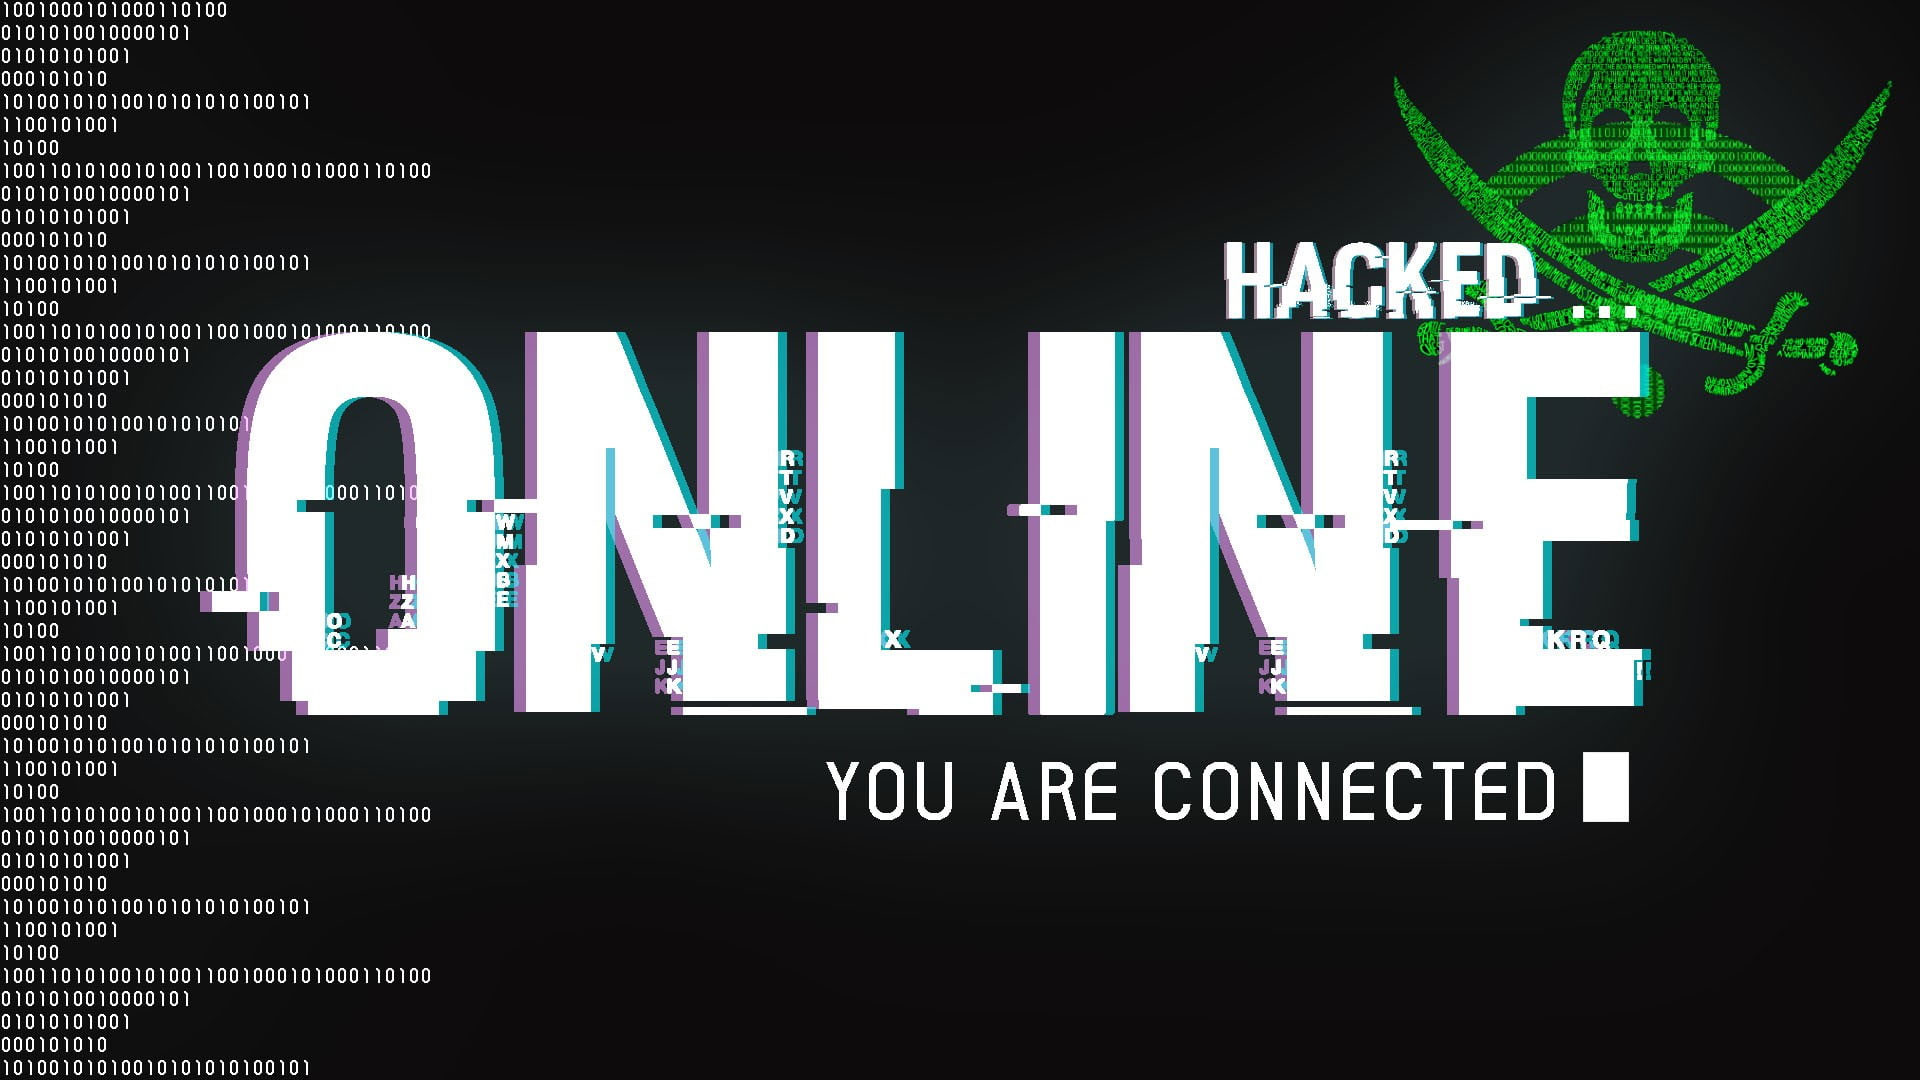 Wallpaper Hacked Online You Are Connect Artwork, Hackers